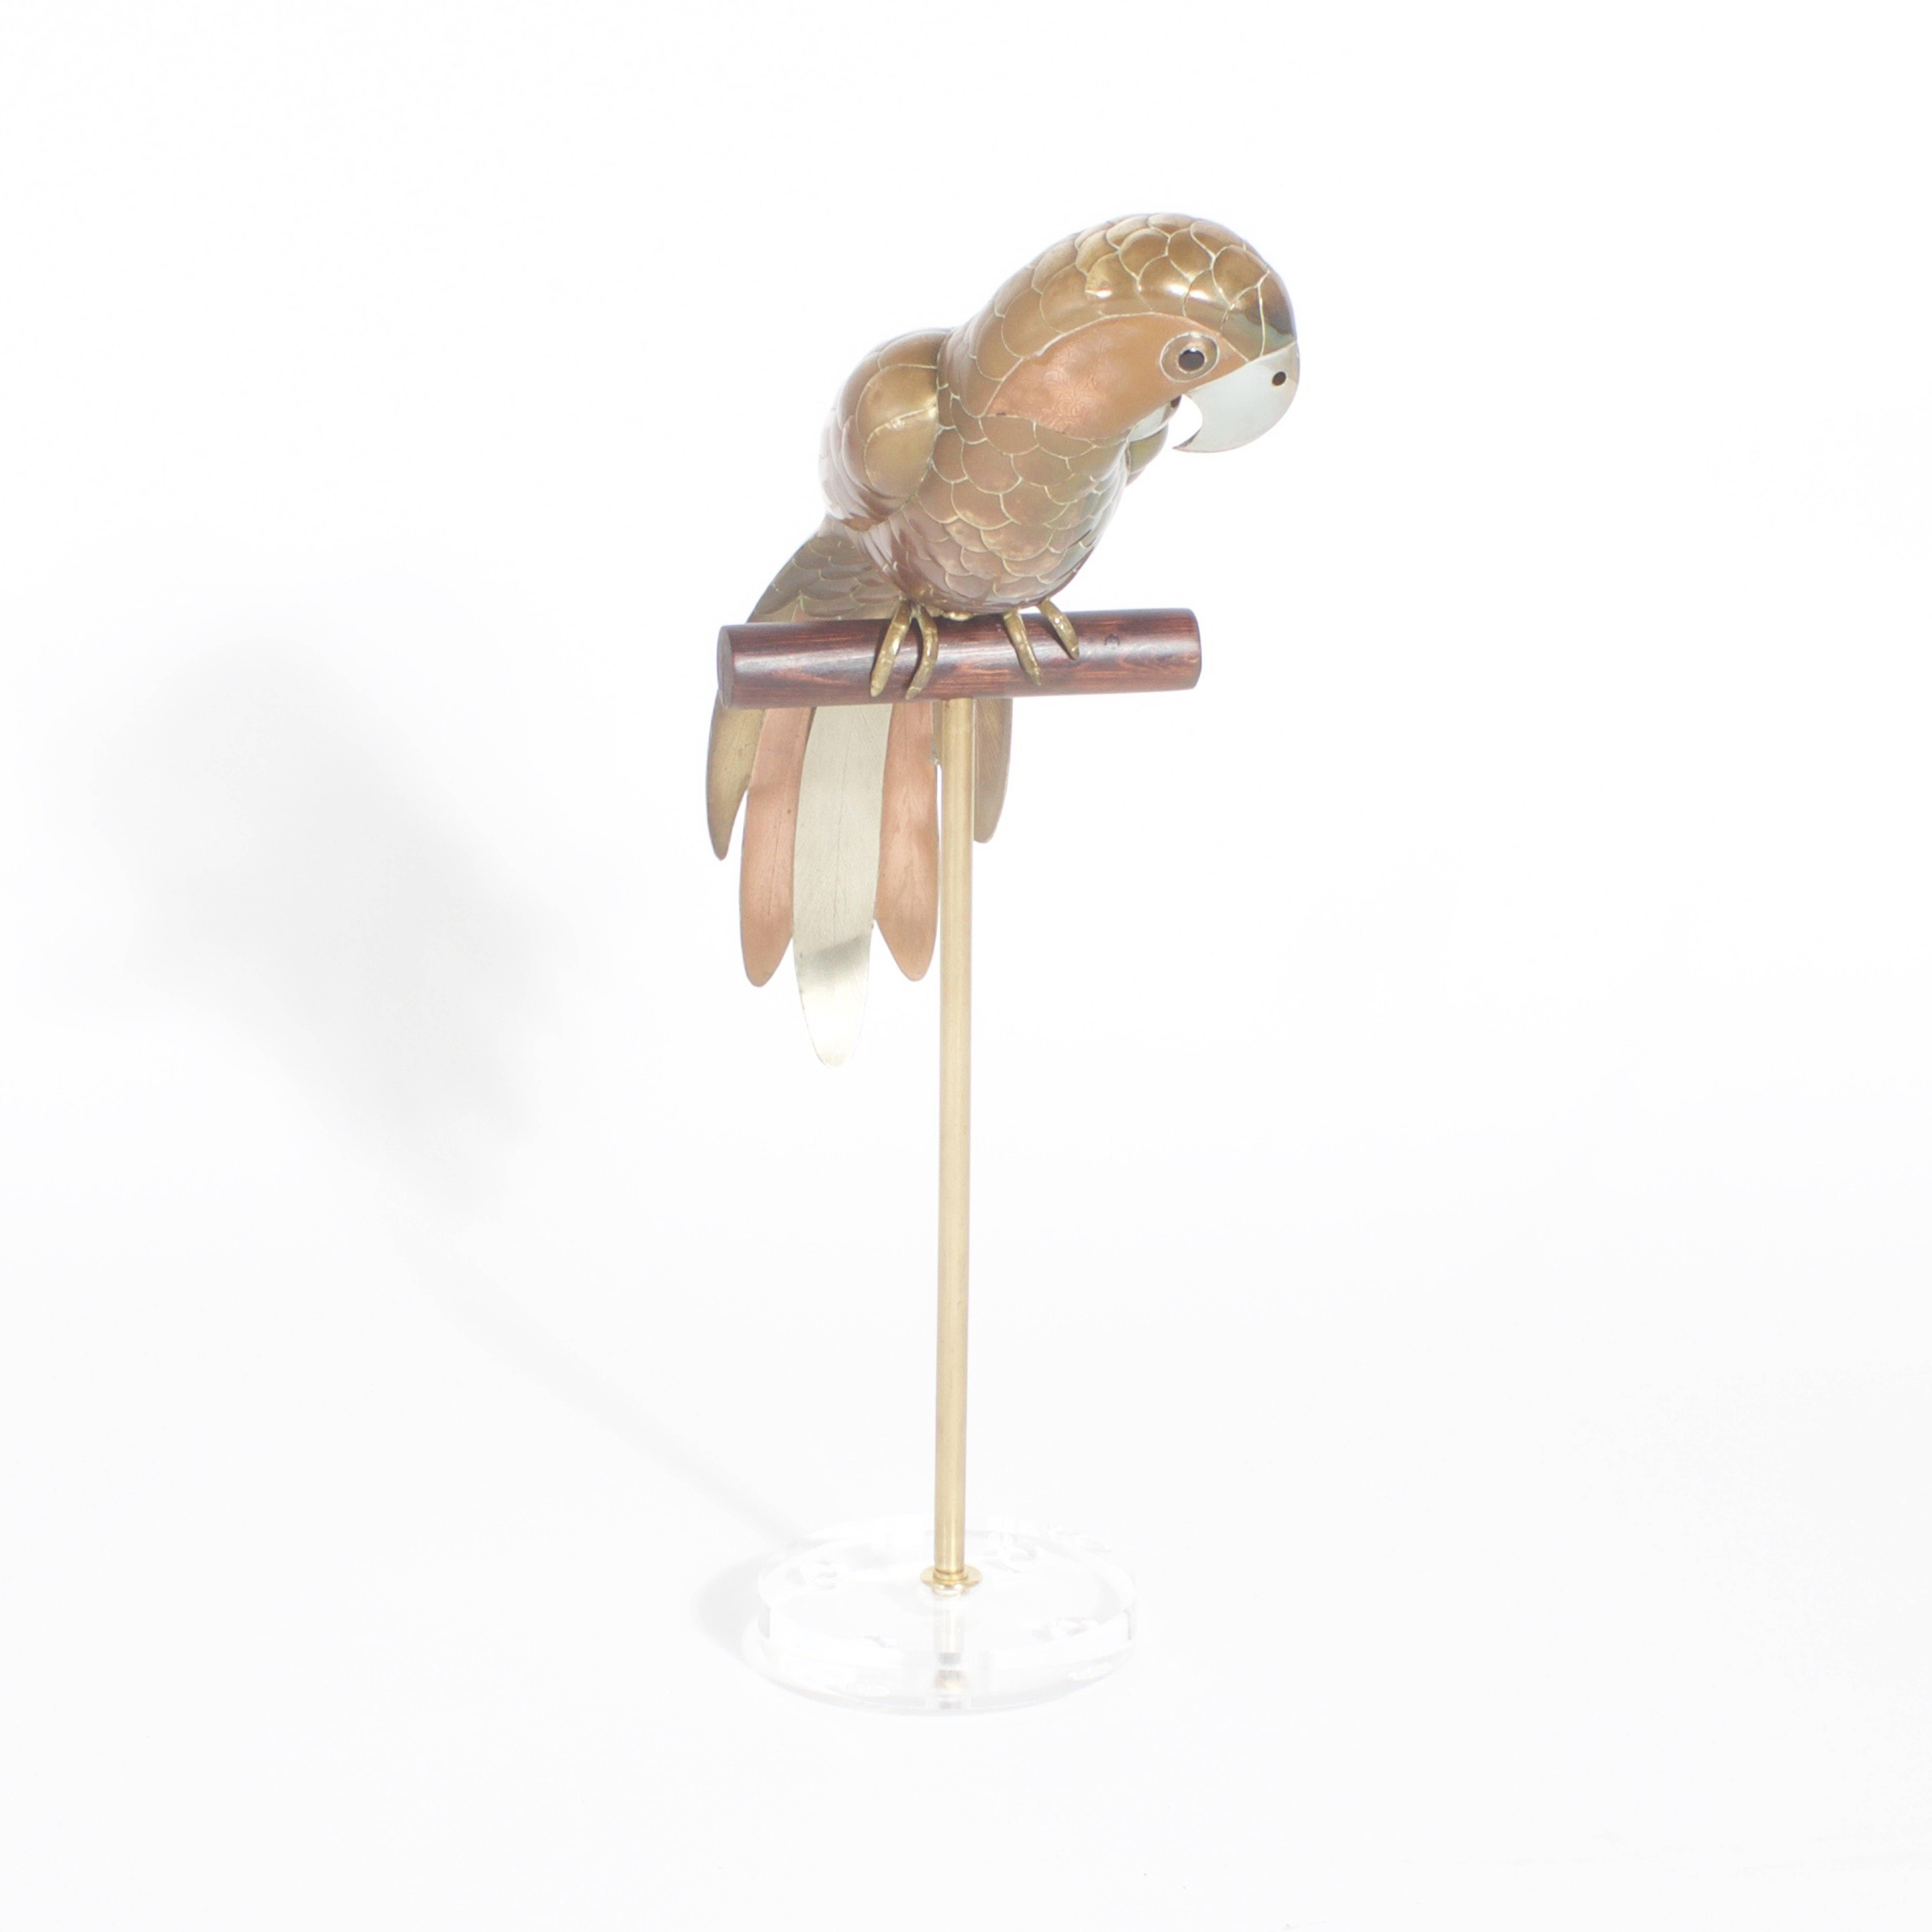 Mid century mixed metal Sergio Bustamante parrot sculpture presented on a wood perch supported by a brass stem on a lucite base. The parrot is composed of brass, copper, and stainless steel, with glass eyes. The perch and mount are later additions.